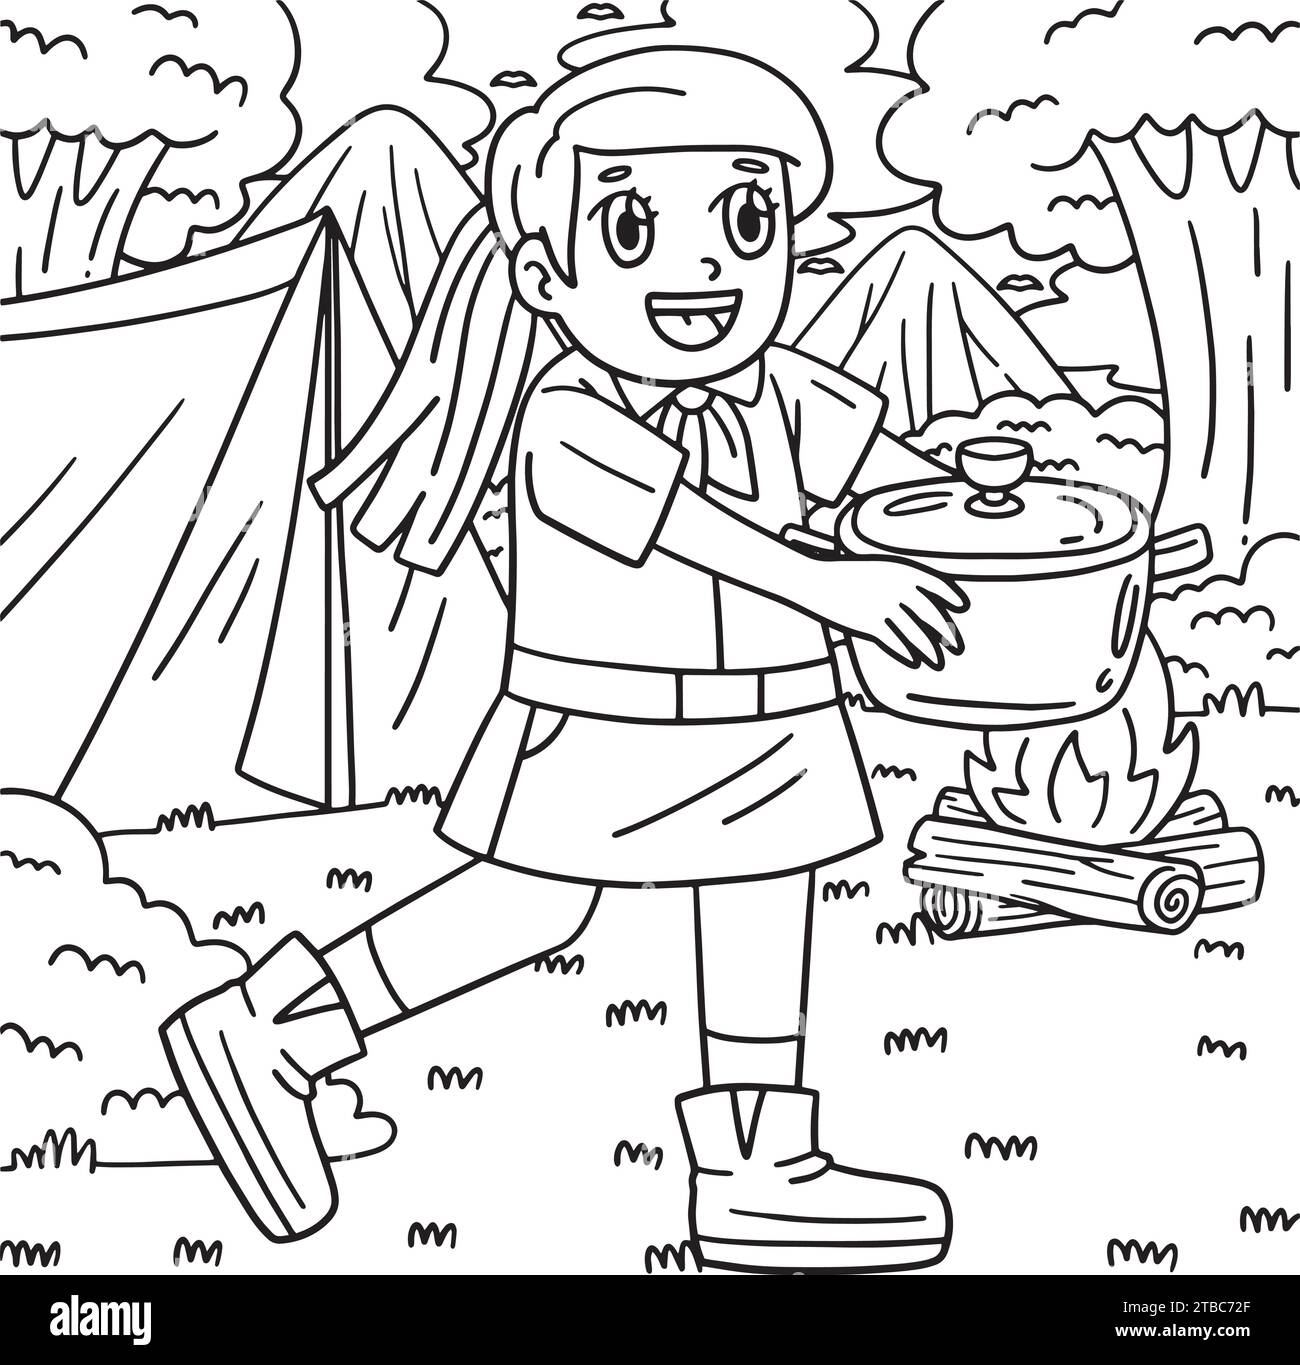 Camping Girl Scout Camper Coloring Page for Kids Stock Vector